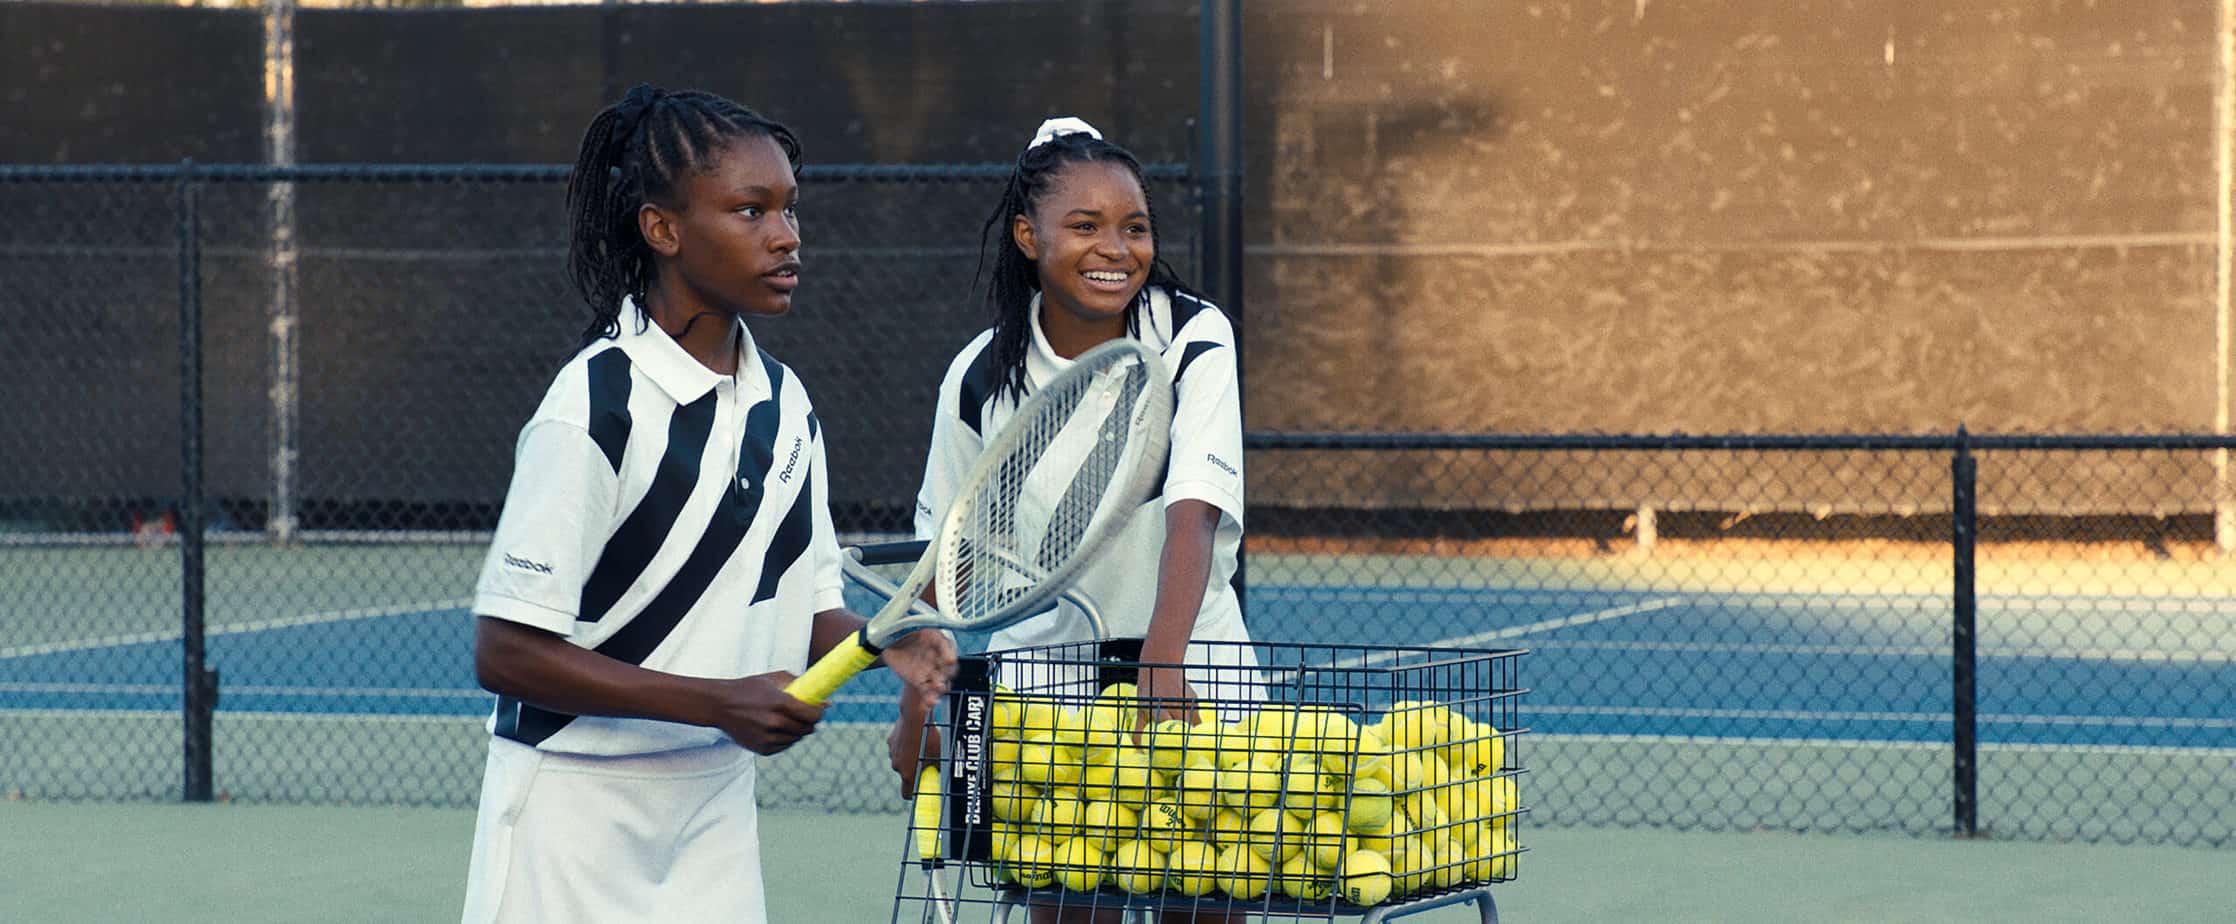 serena and venus in king richard ok for kids parent review